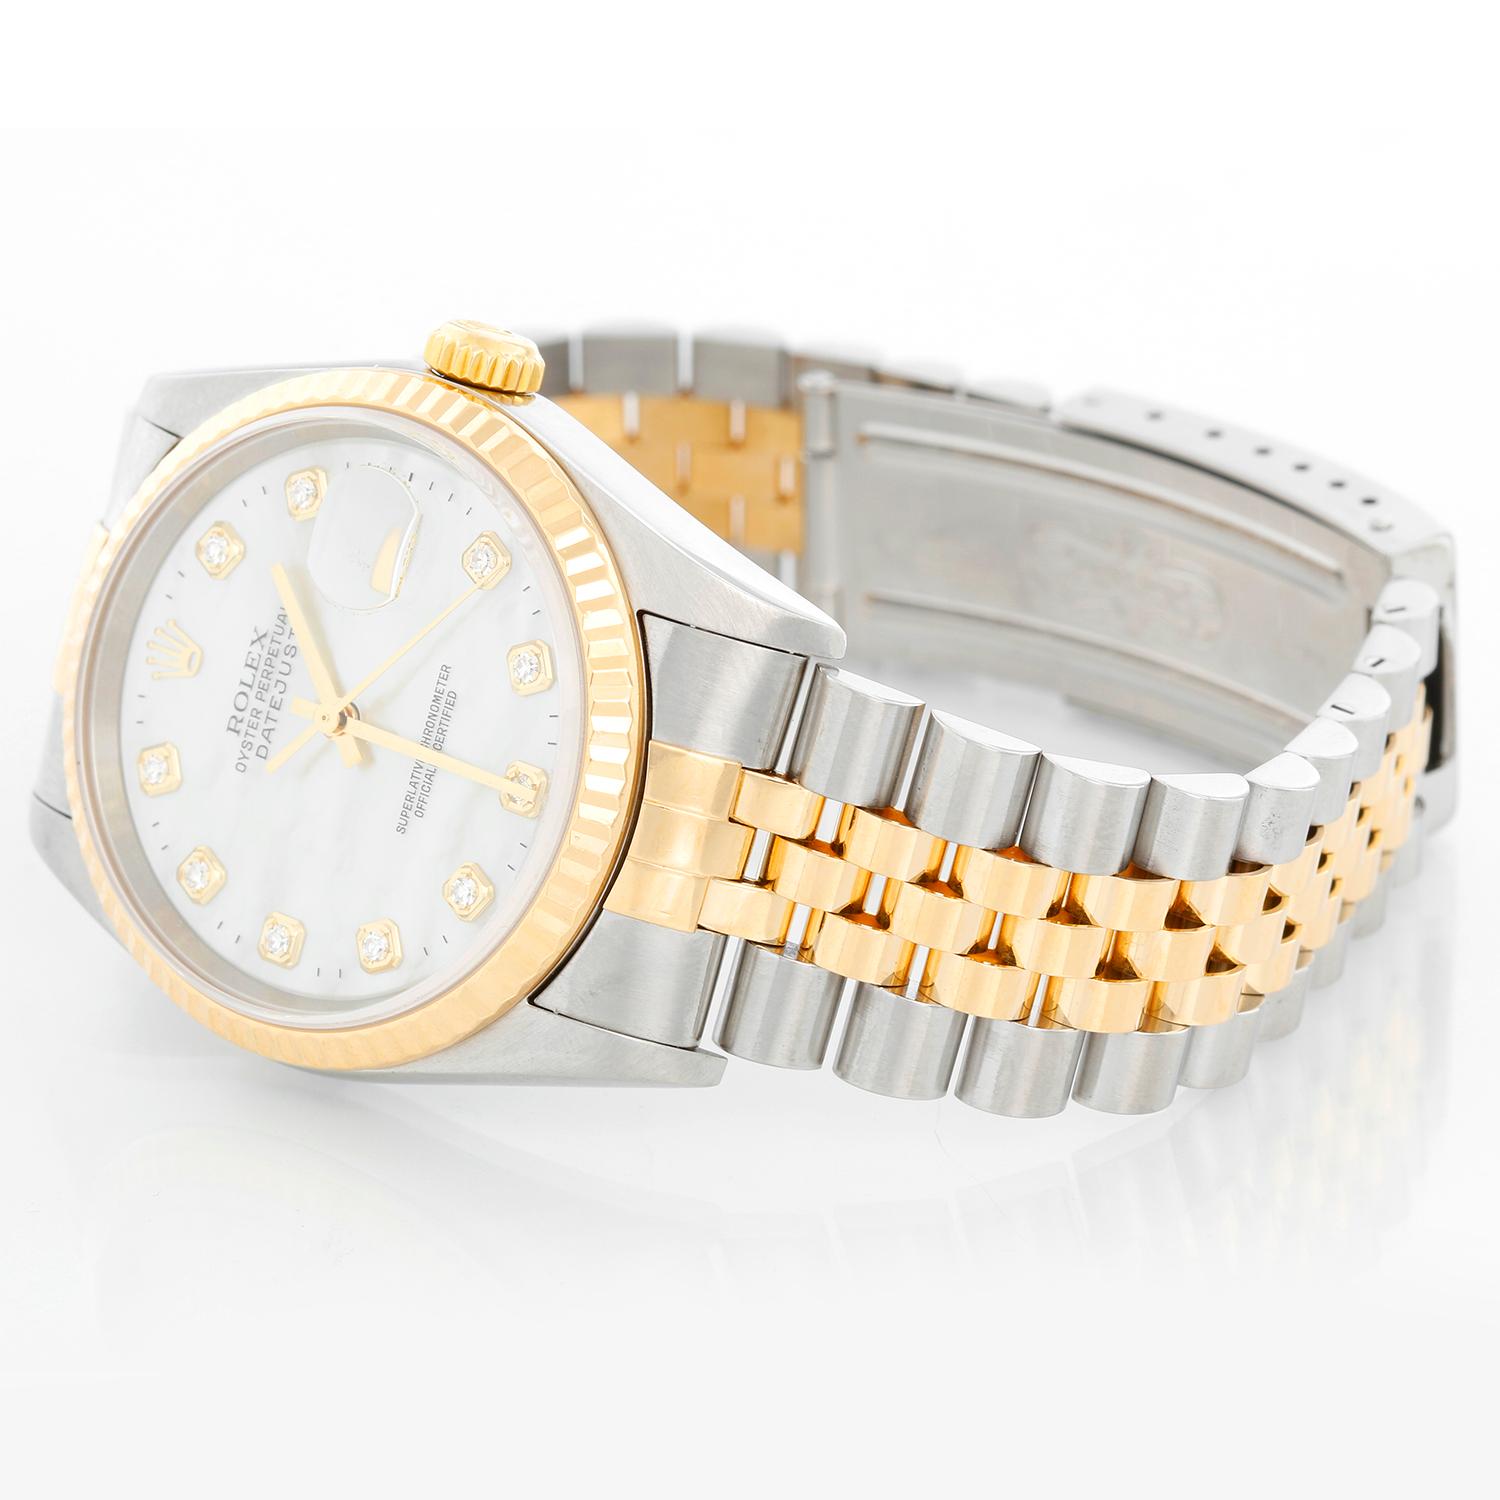 Rolex Datejust 2-Tone Men's Steel & Gold Watch 16233 - Automatic winding, Quickset, sapphire crystal. Stainless steel case with yellow gold bezel (36mm diameter). Factory Mother of Pearl Diamond dial. Stainless steel and 18k yellow gold Jubilee